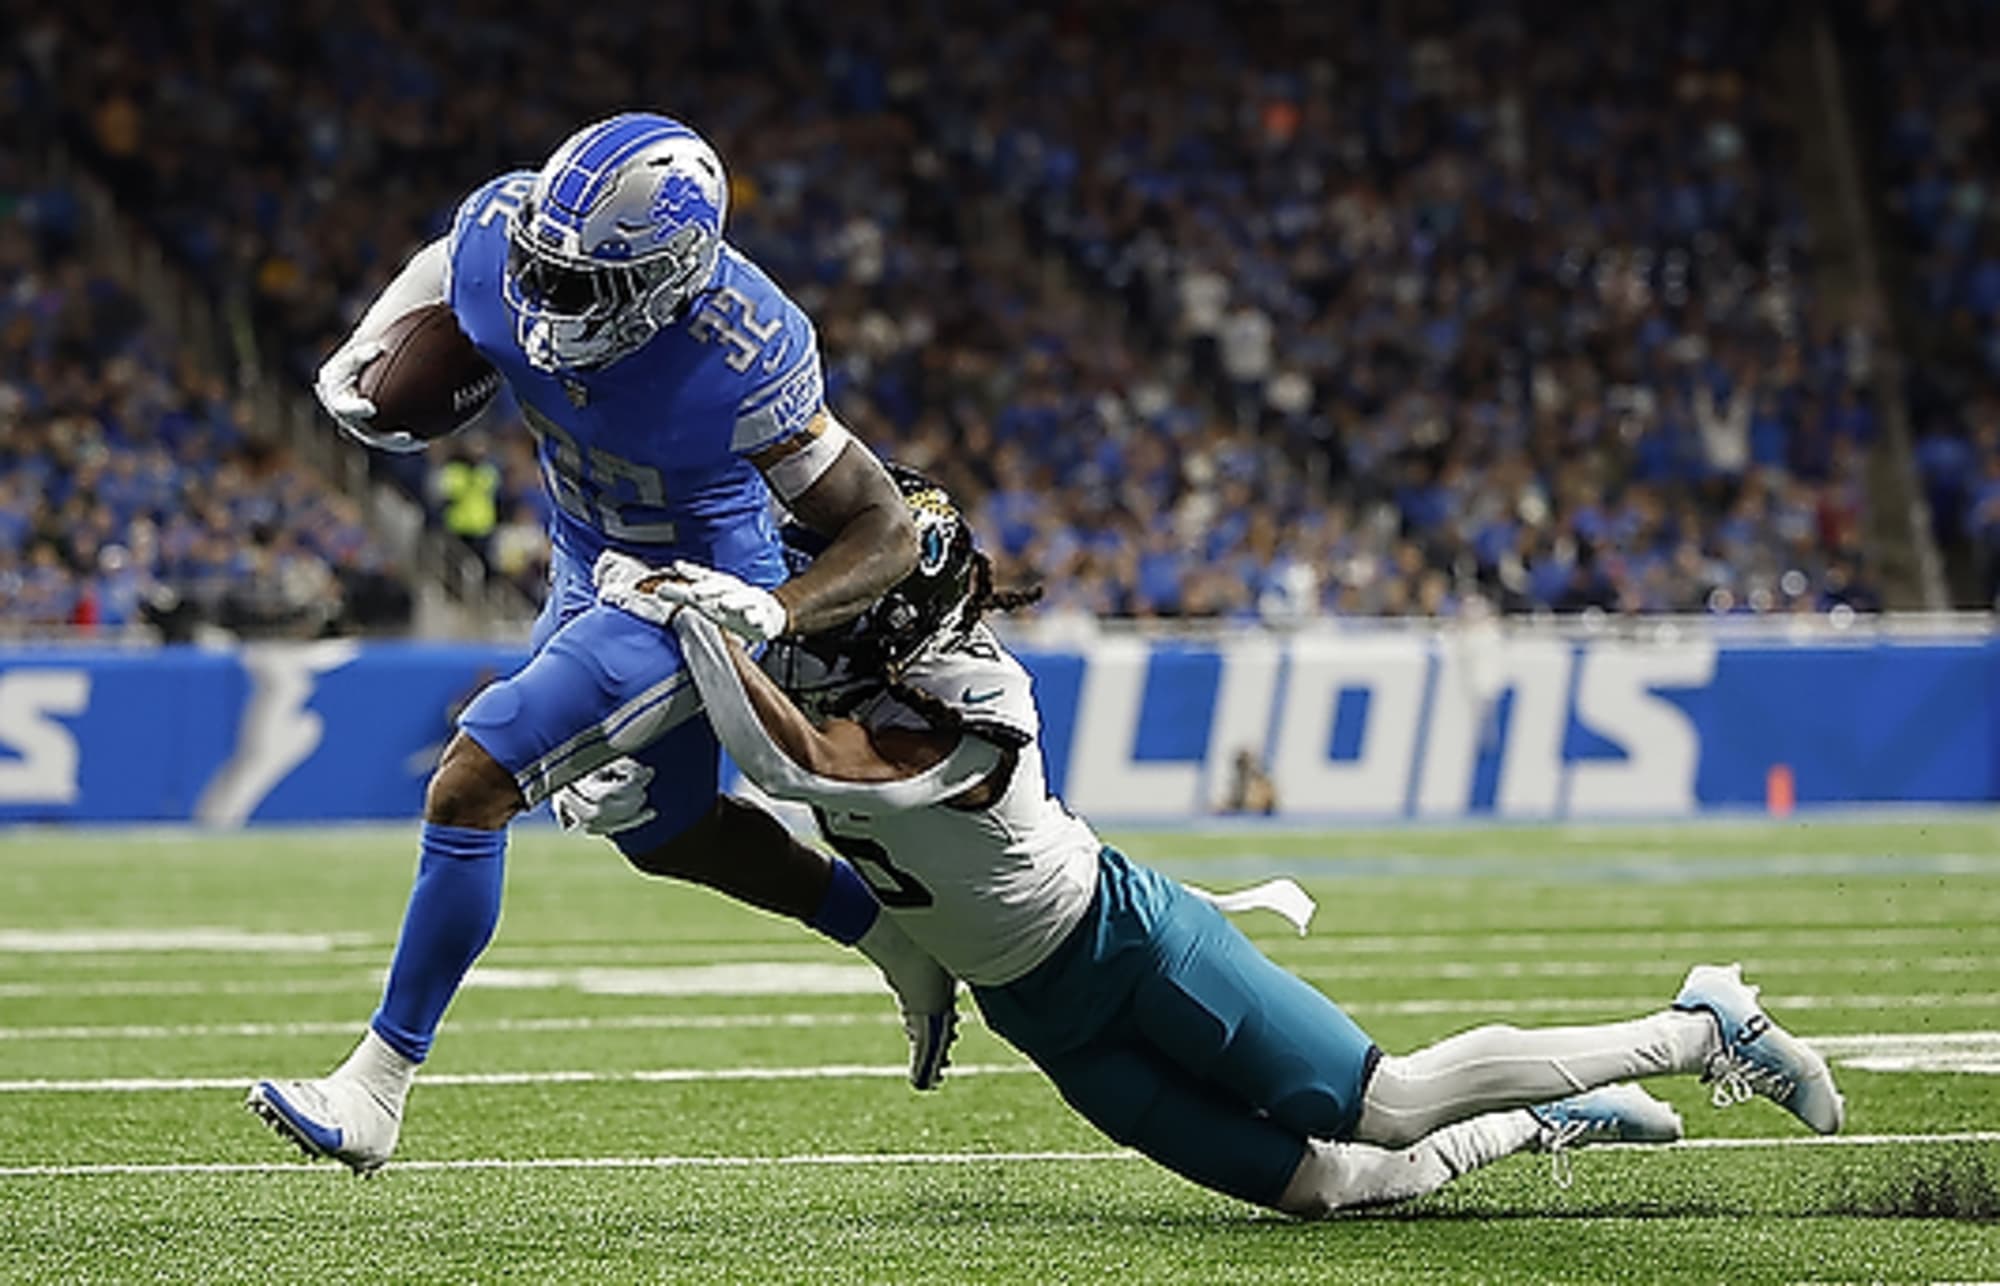 Lions running back D’Andre Swift is an absolute muststart in fantasy